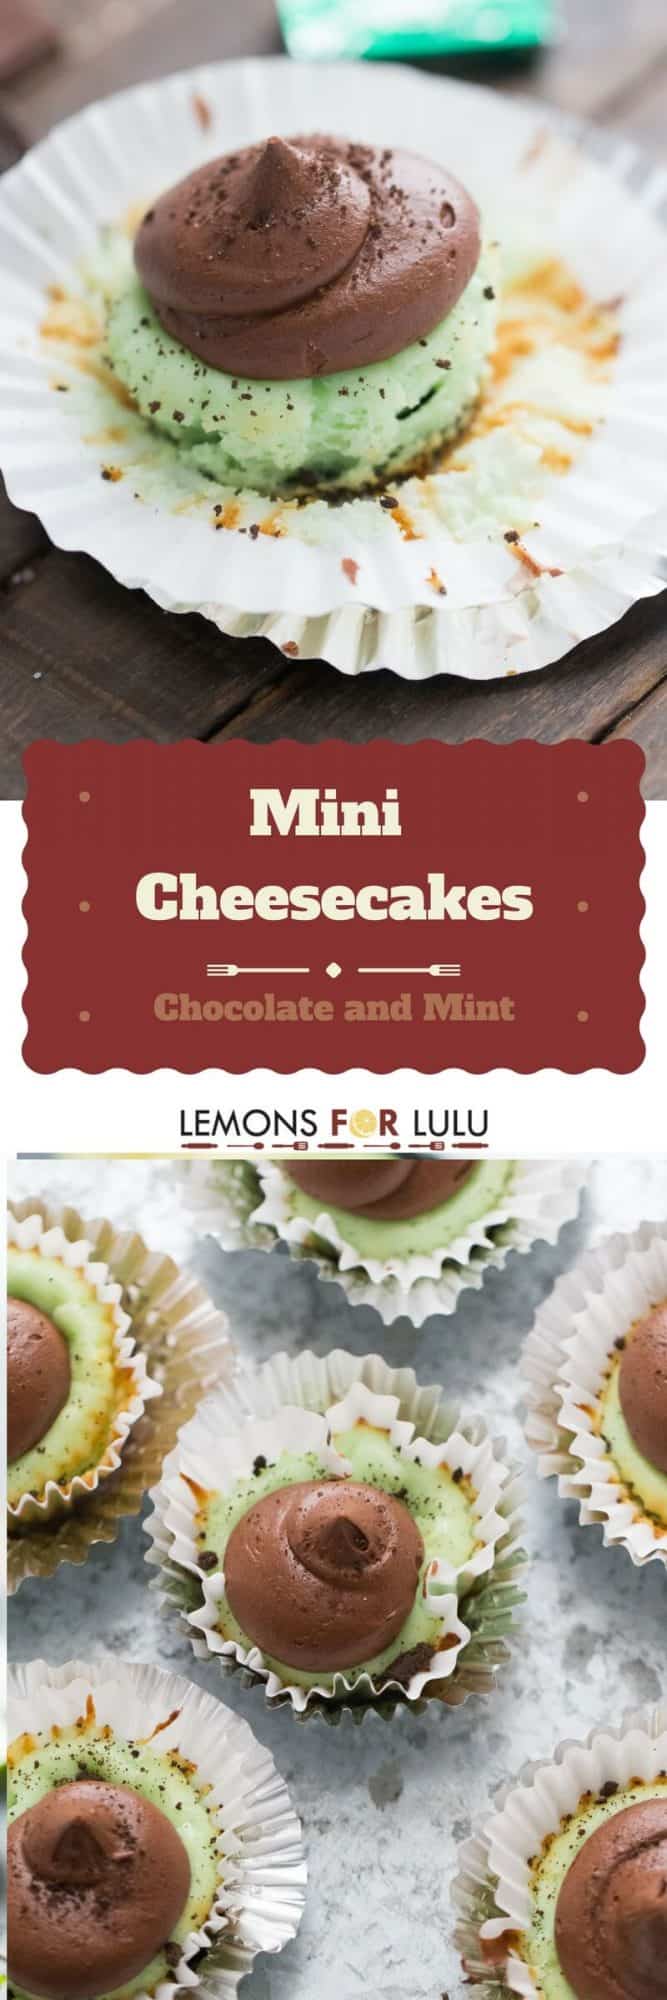 Two-bite mini cheesecakes are filled with a cool mint flavor. The centers of each cake is filled with a decadent and creamy chocolate fudge frosting!